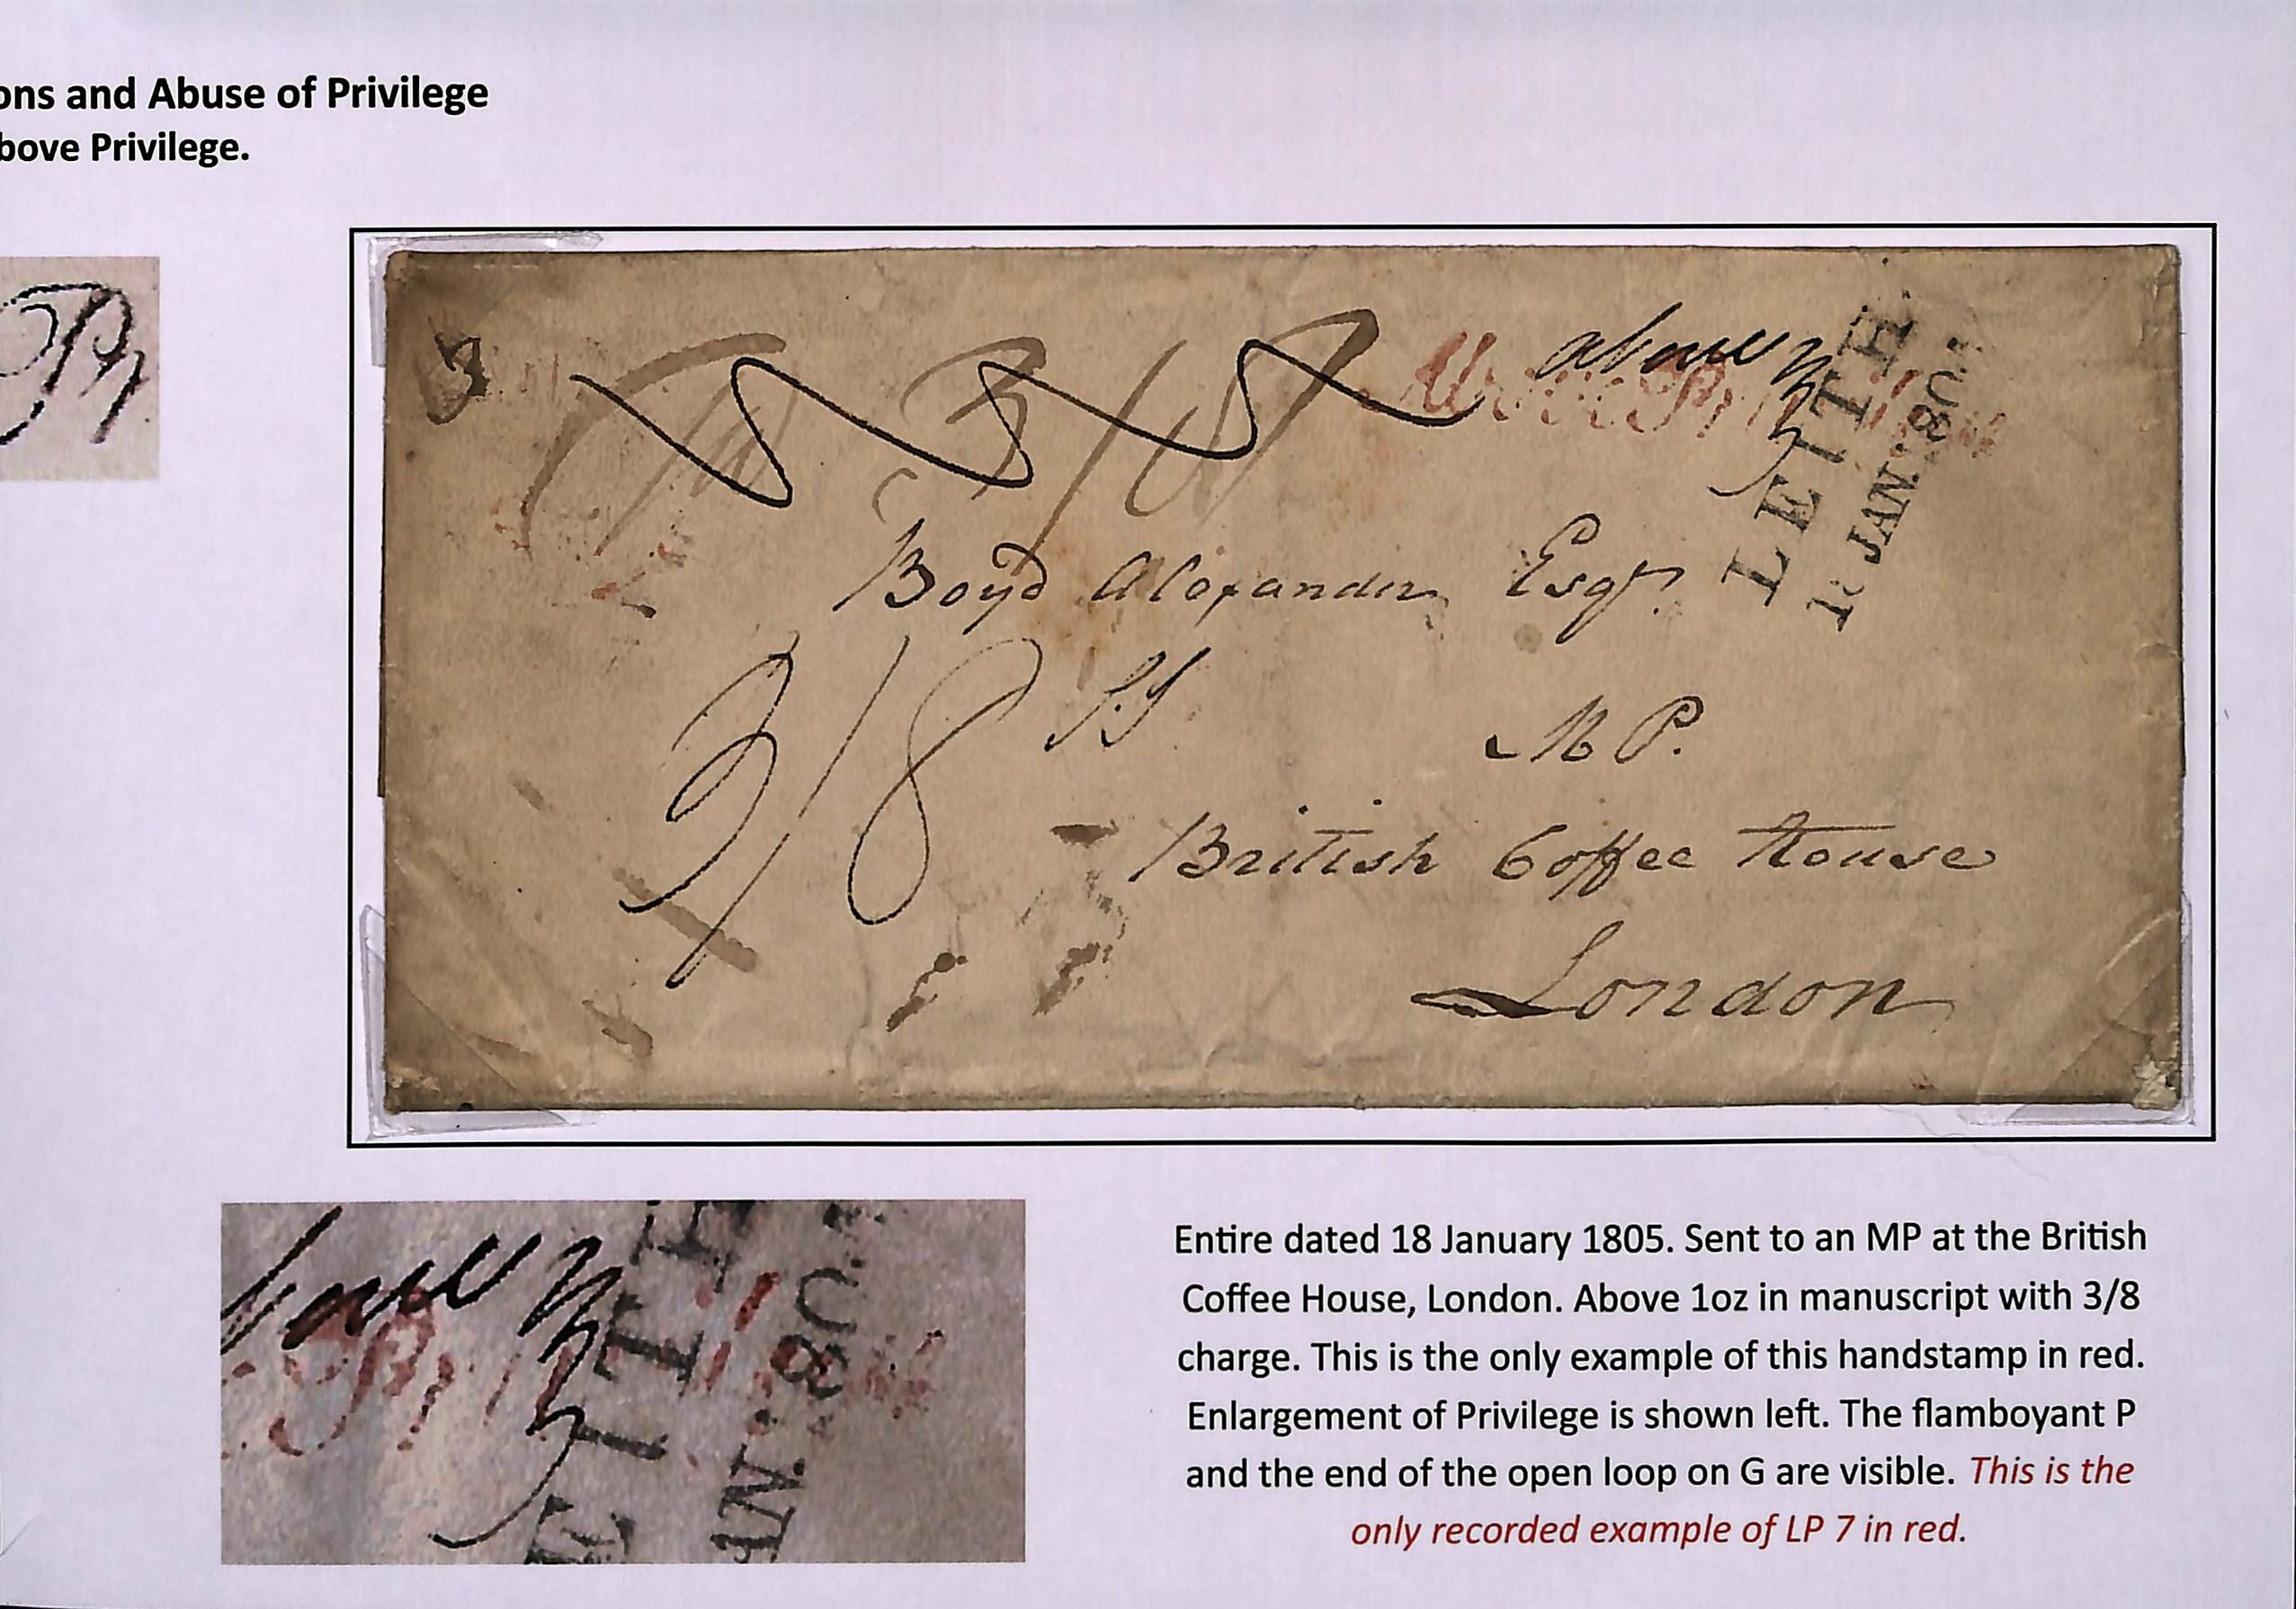 1805 (Jan 18) Entire letter from Leith to an M.P at the British Coffee House in London, "Pd 3/8"